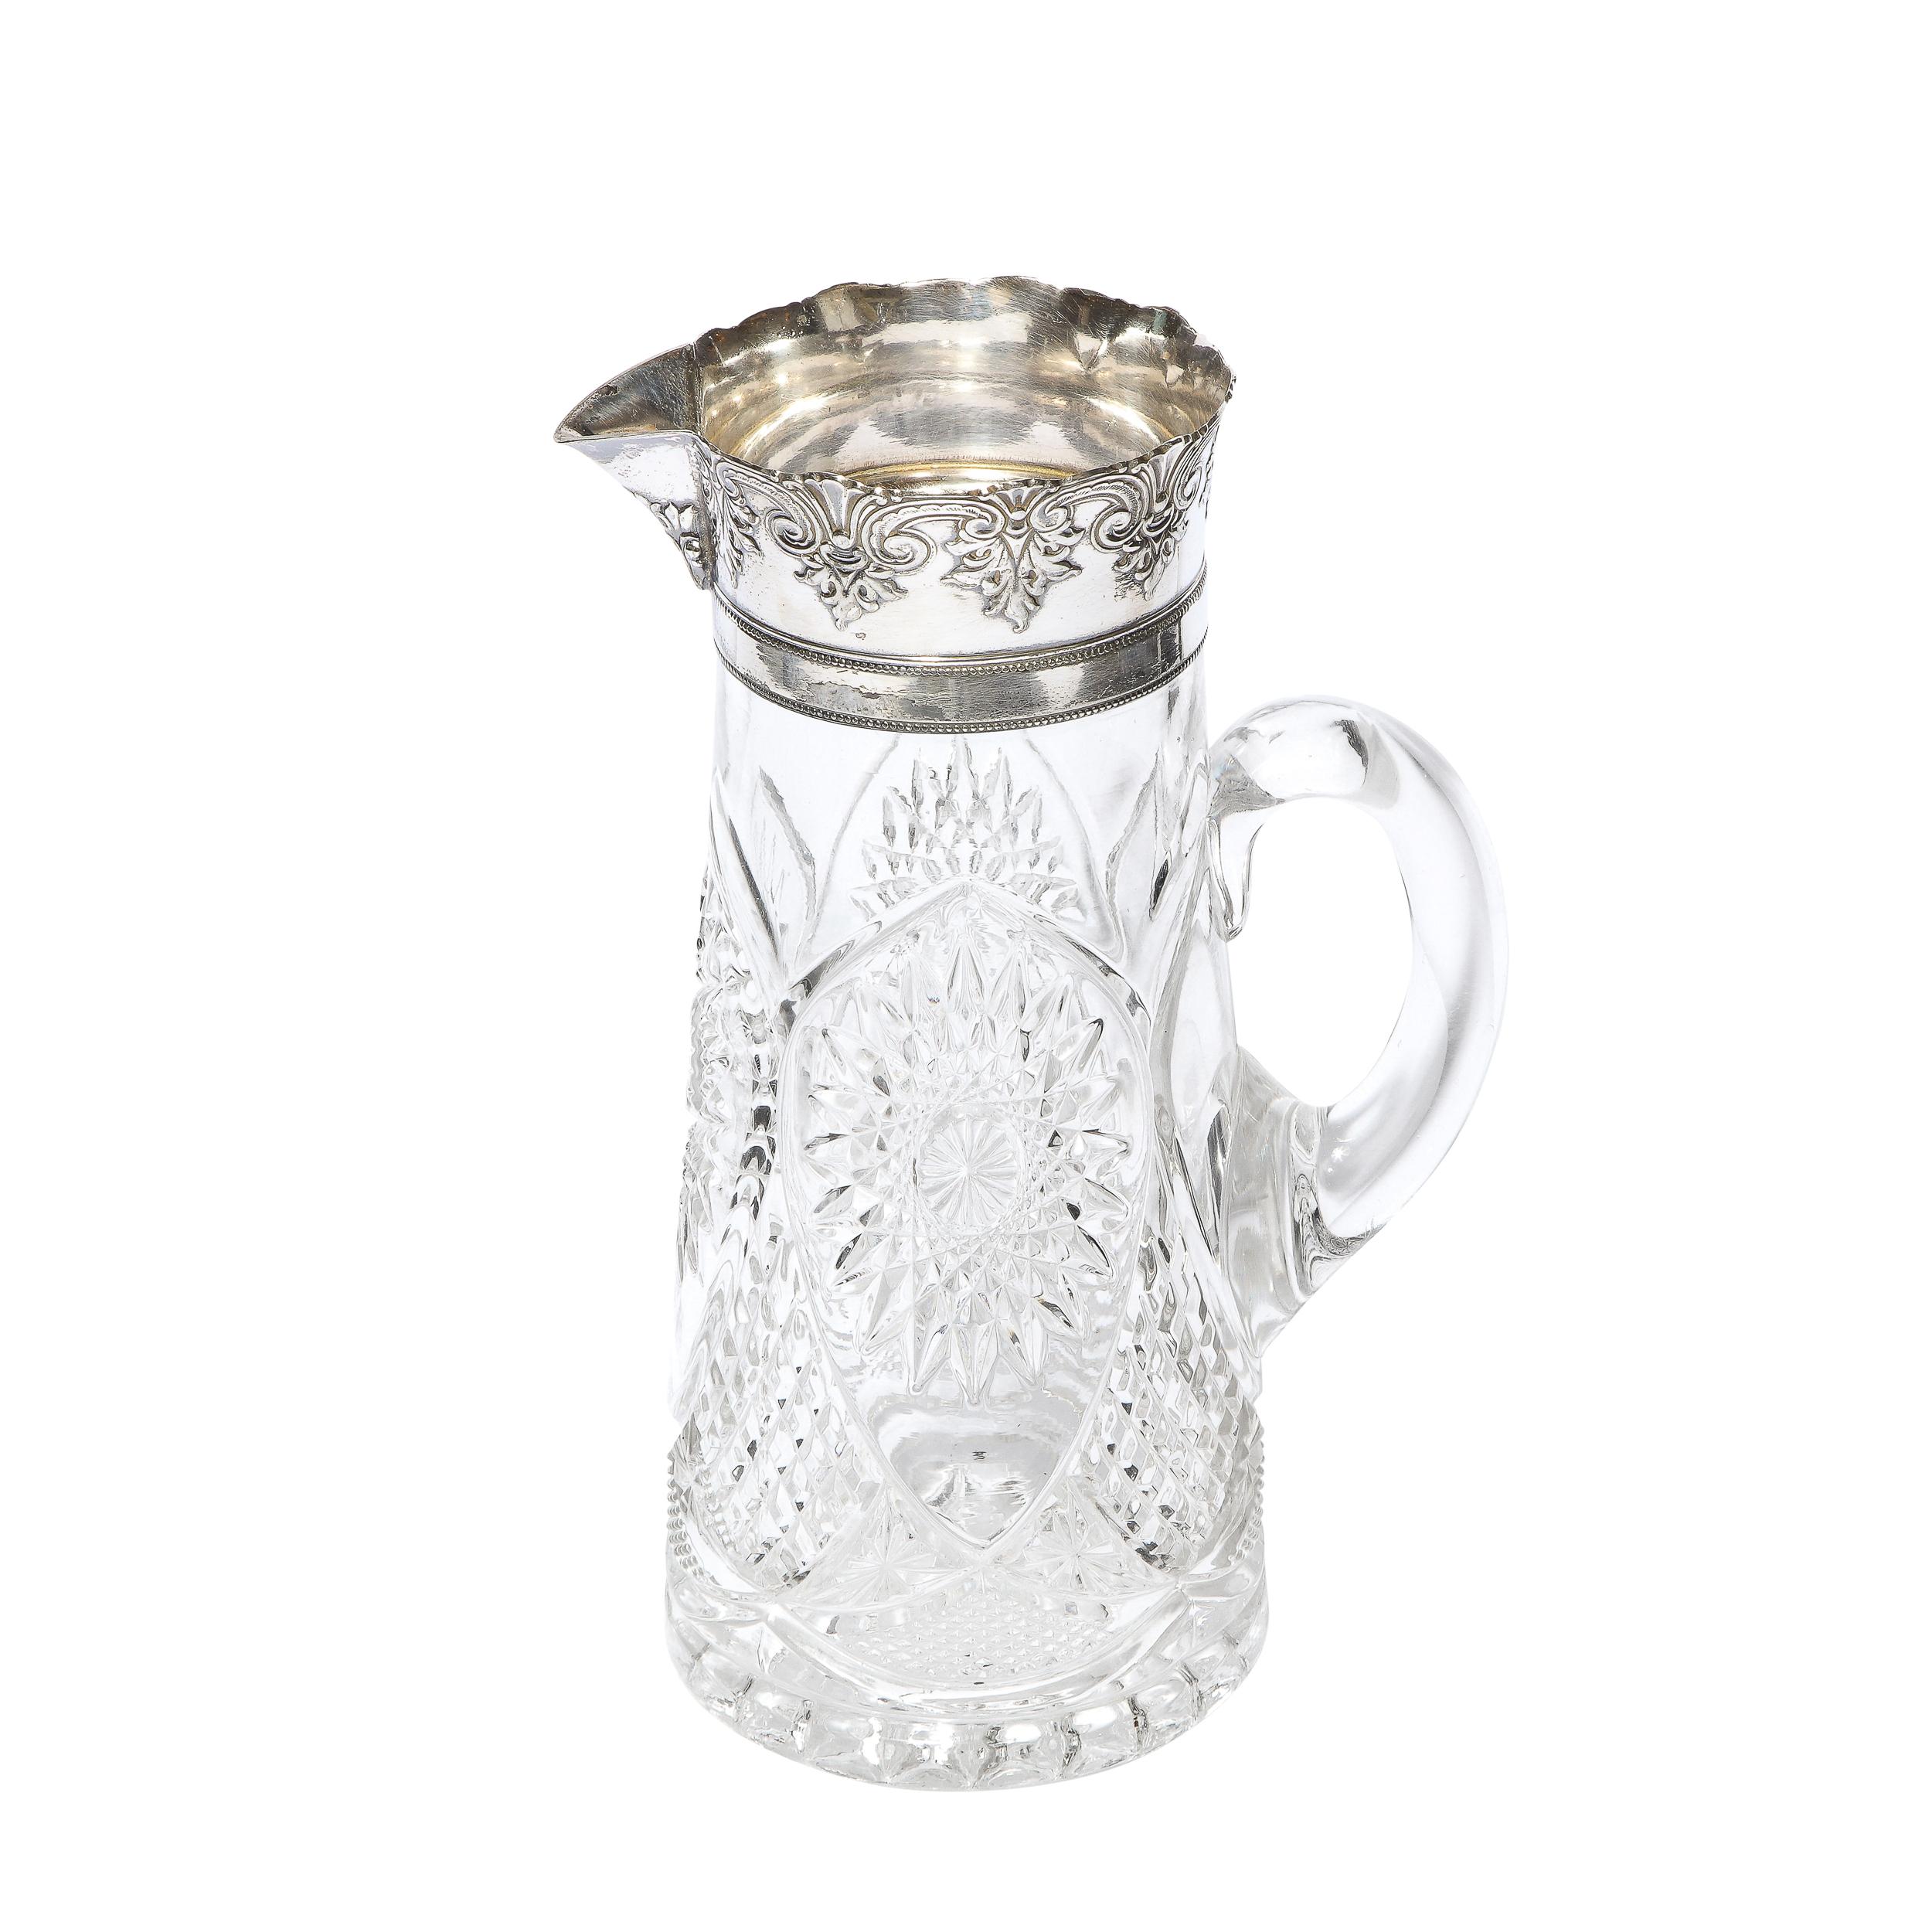 1940s Art Deco Pressed Glass Pitcher with Geometric Details & Silver Plated Top 5